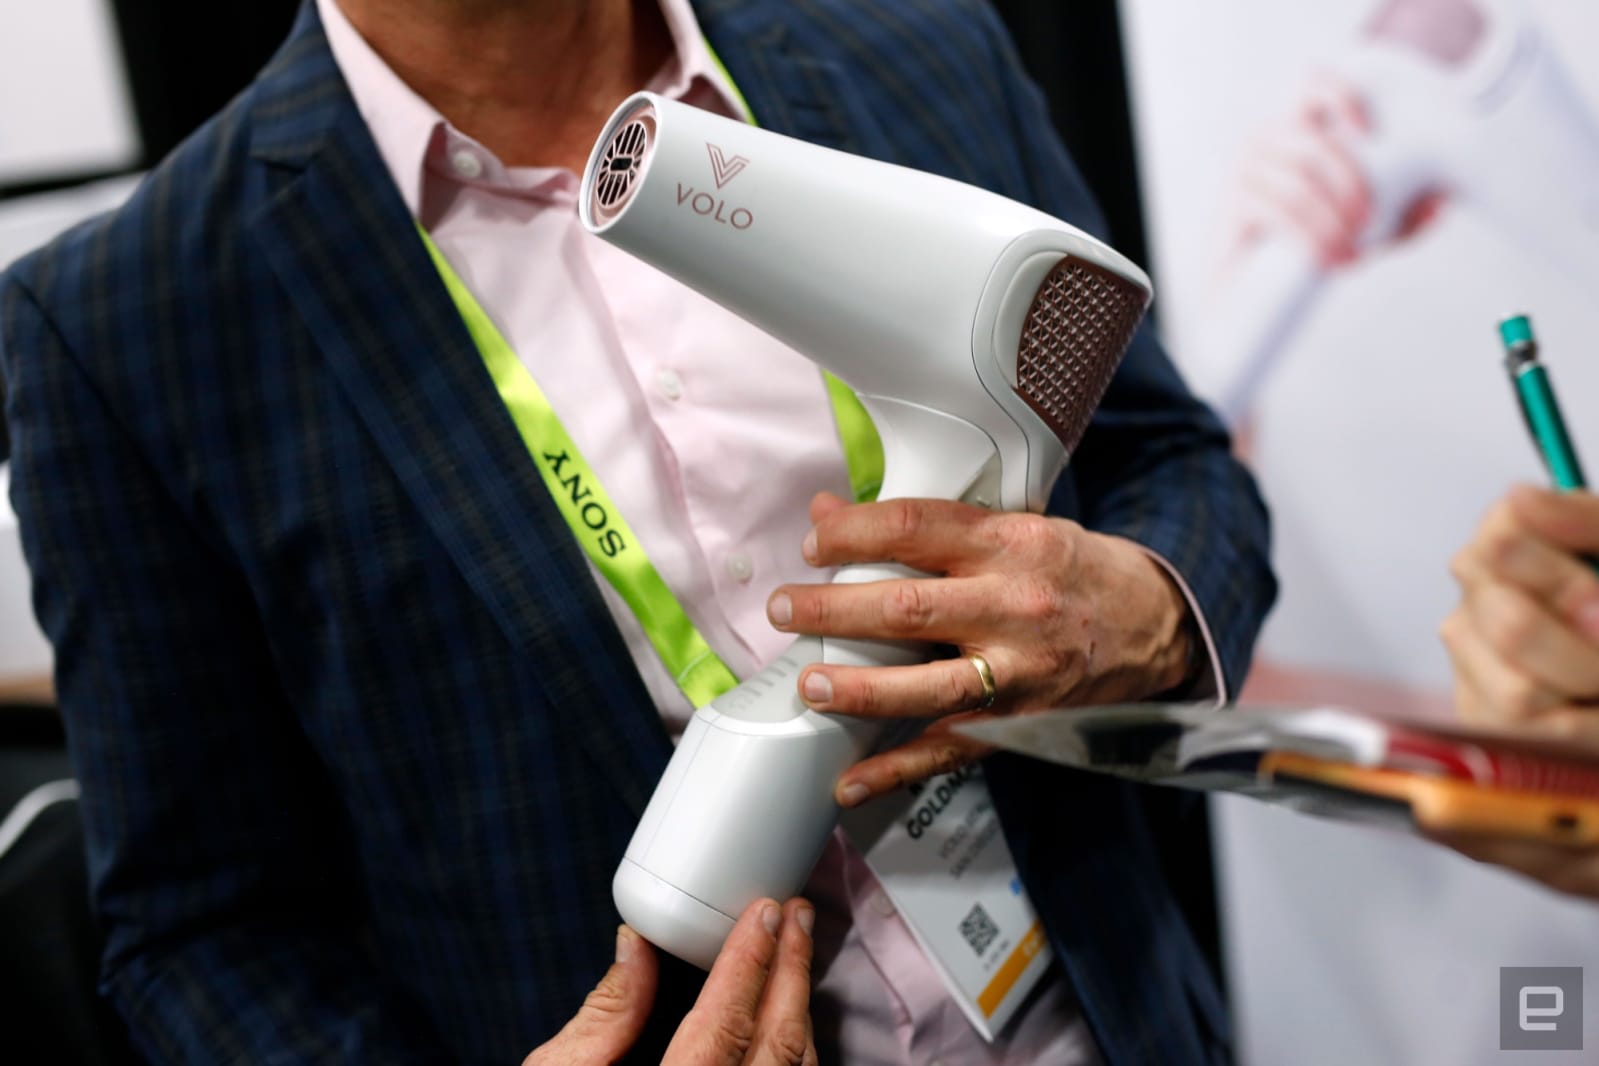 Volo Go infrared hairdryer at CES 2019